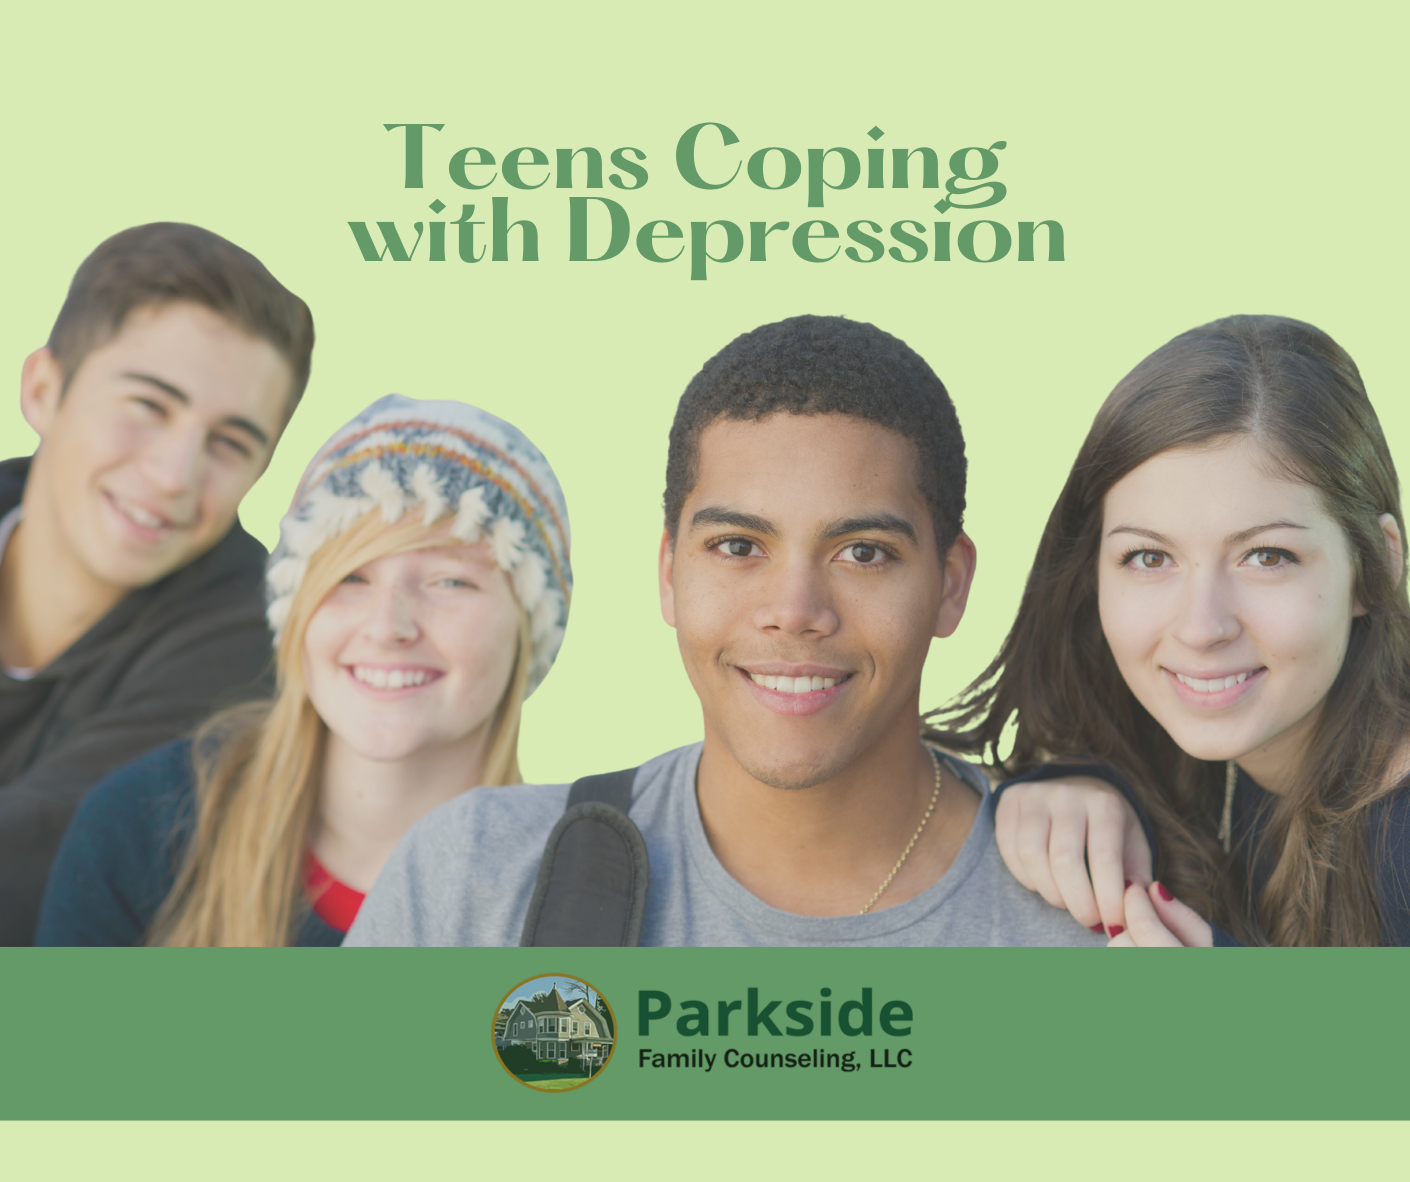 Teens coping with depression group 2